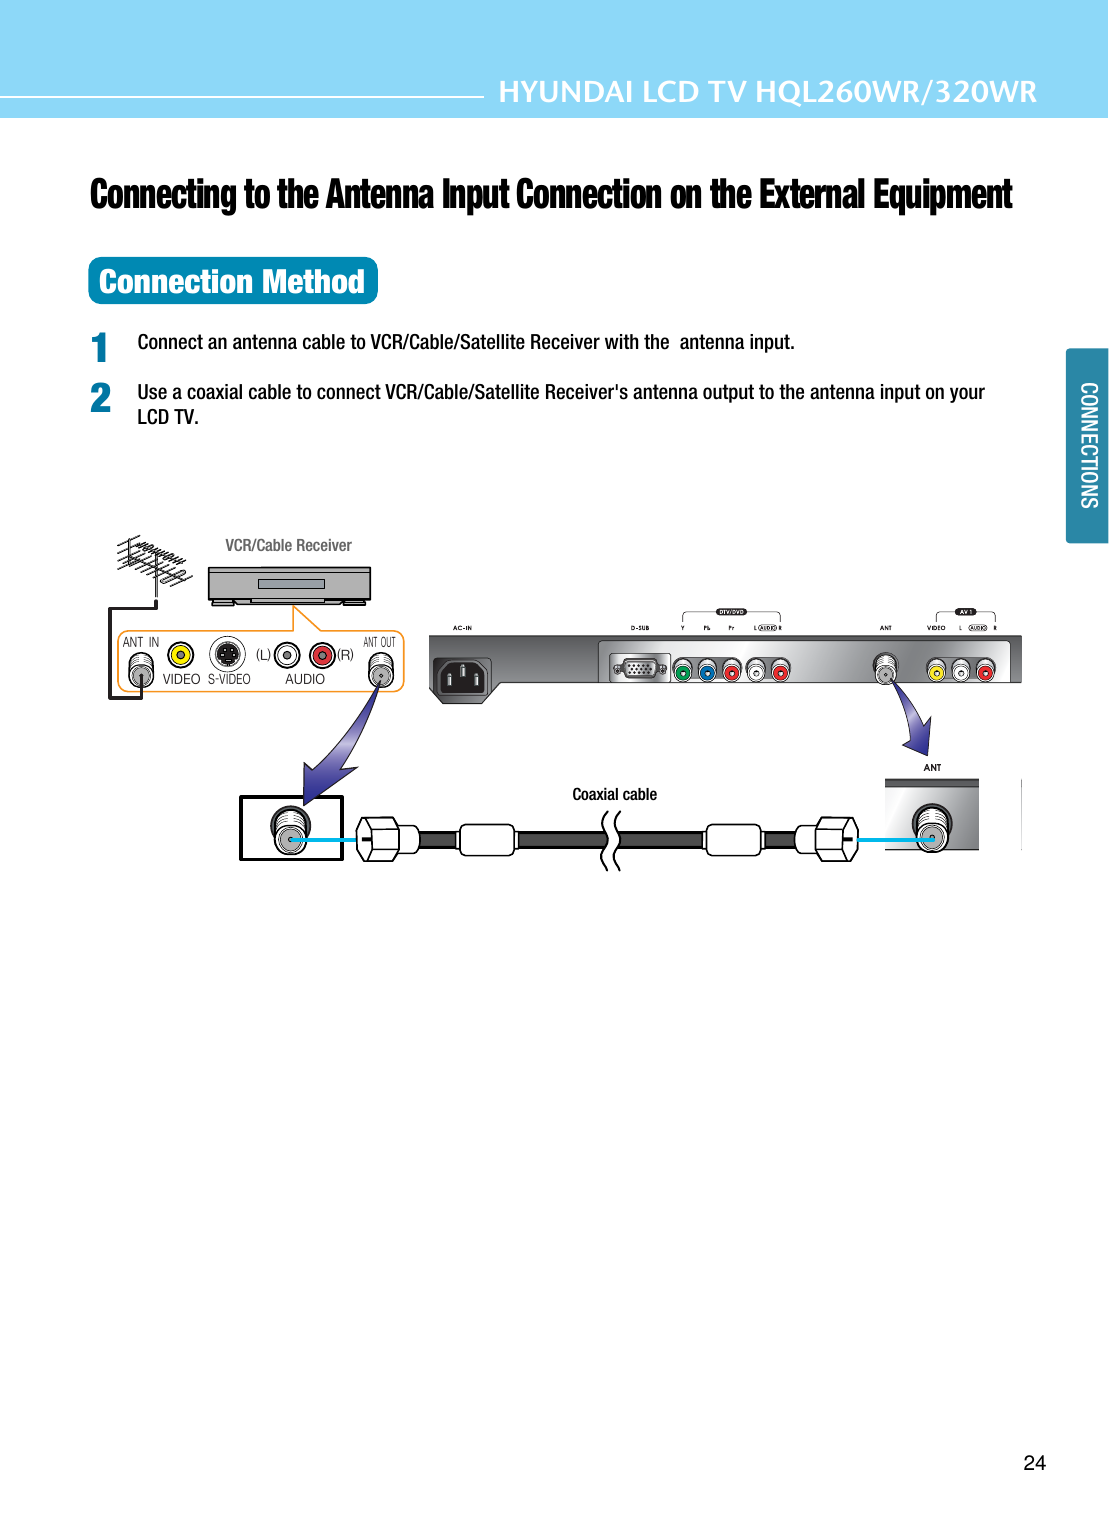 HYUNDAI LCD TV HQL260WR/320WR)=,17;&gt;1,-7&gt;1,-7:4)6&lt;7=&lt;)6&lt;1624CONNECTIONSConnecting to the Antenna Input Connection on the External EquipmentConnection Method Connect an antenna cable to VCR/Cable/Satellite Receiver with the  antenna input.Use a coaxial cable to connect VCR/Cable/Satellite Receiver&apos;s antenna output to the antenna input on yourLCD TV.12Coaxial cableVCR/Cable Receiver